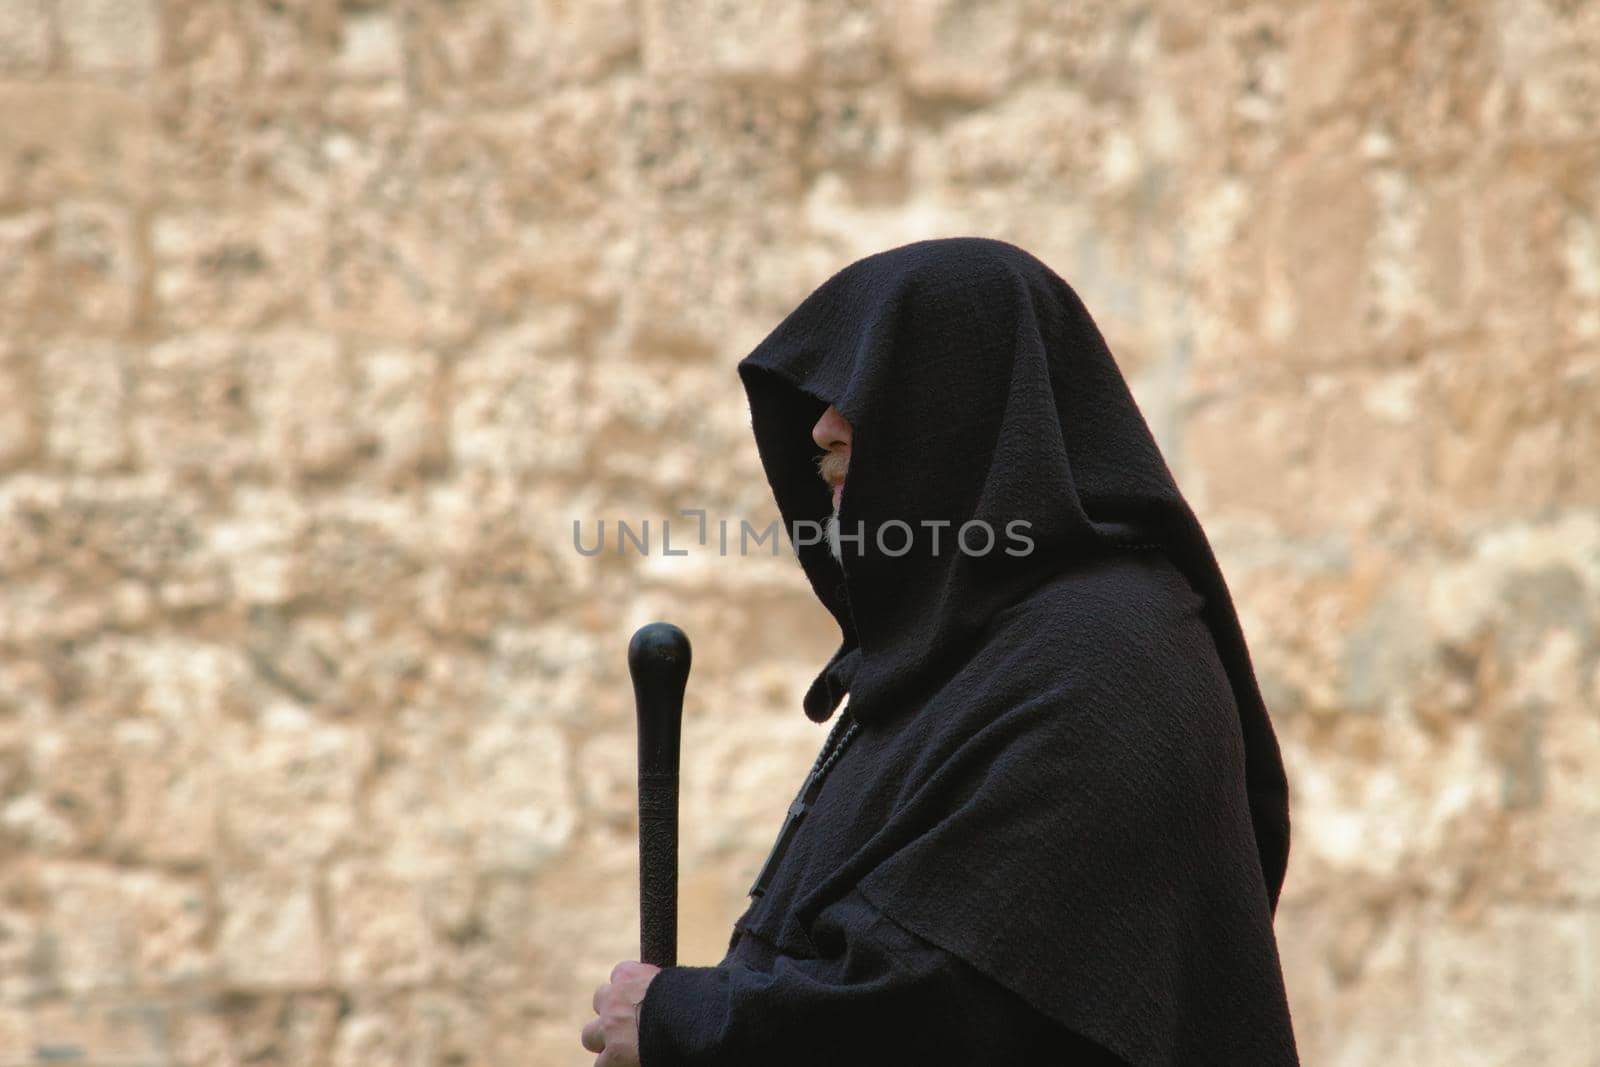 Hooded spooky looking medieval monk in a traditional black robe with staff